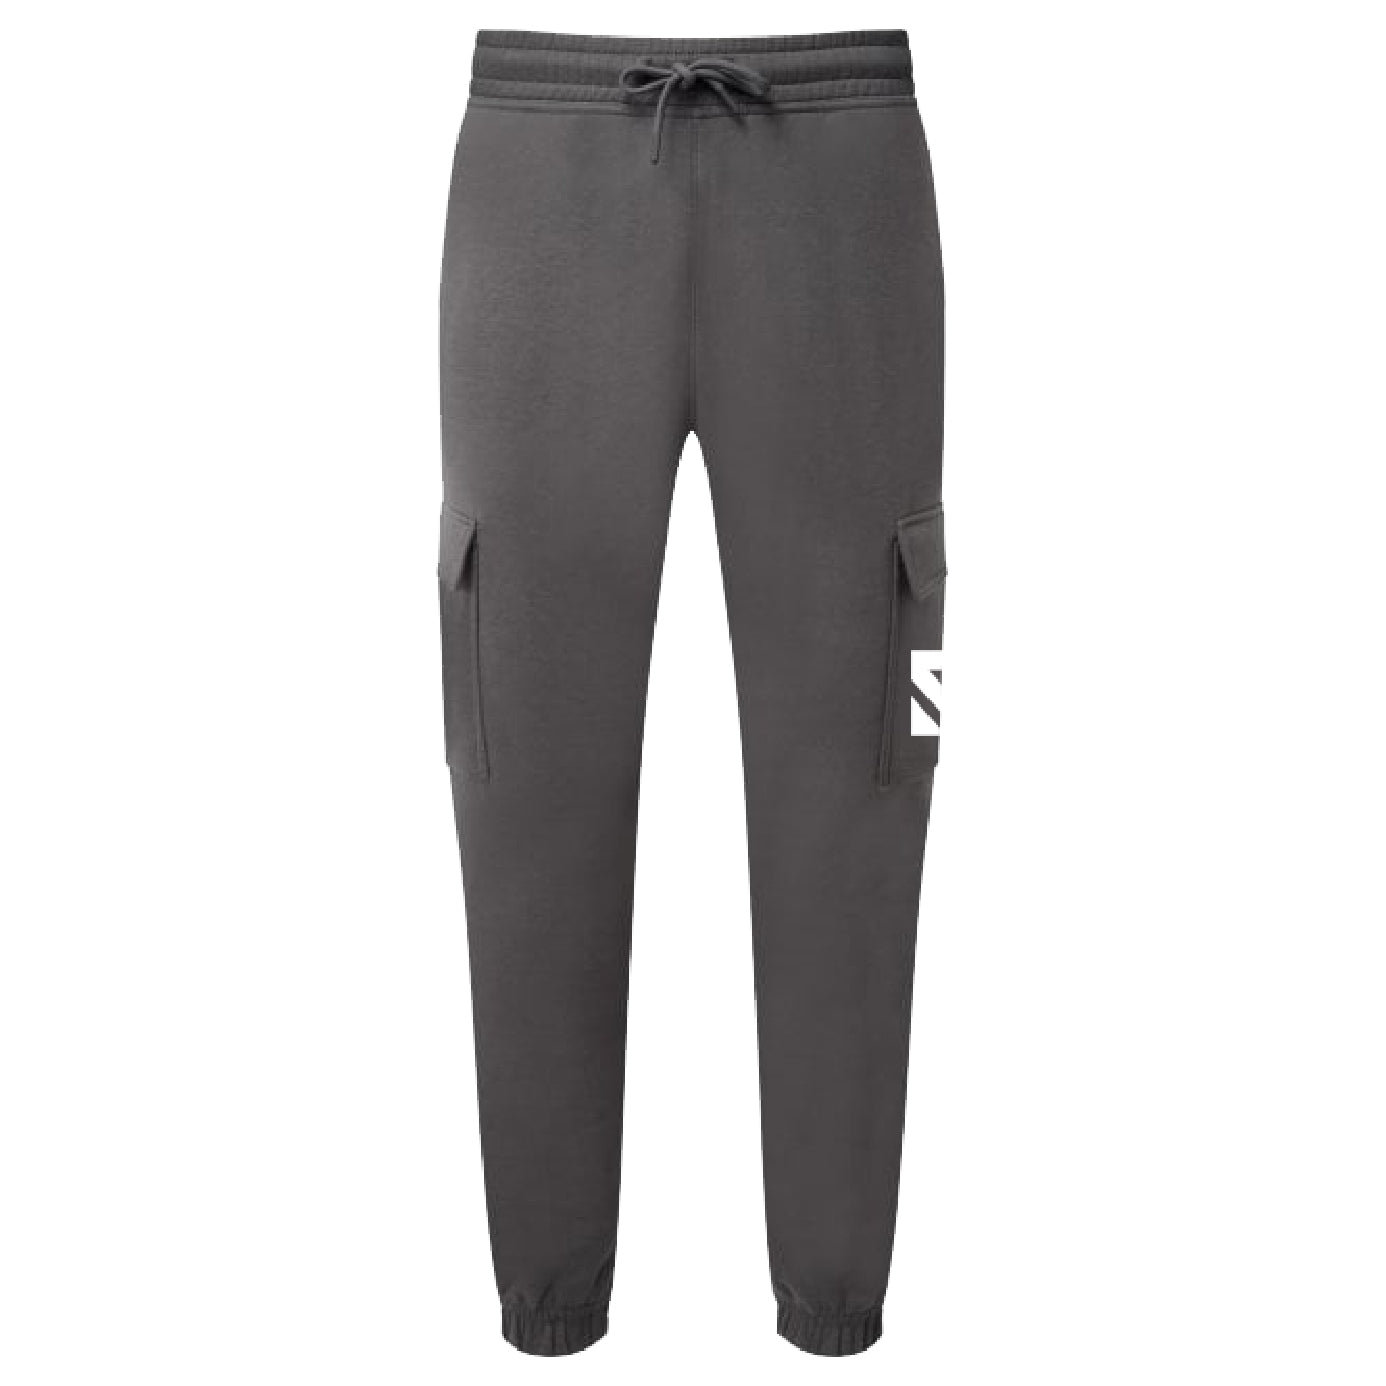 Charcoal Cargo bottoms